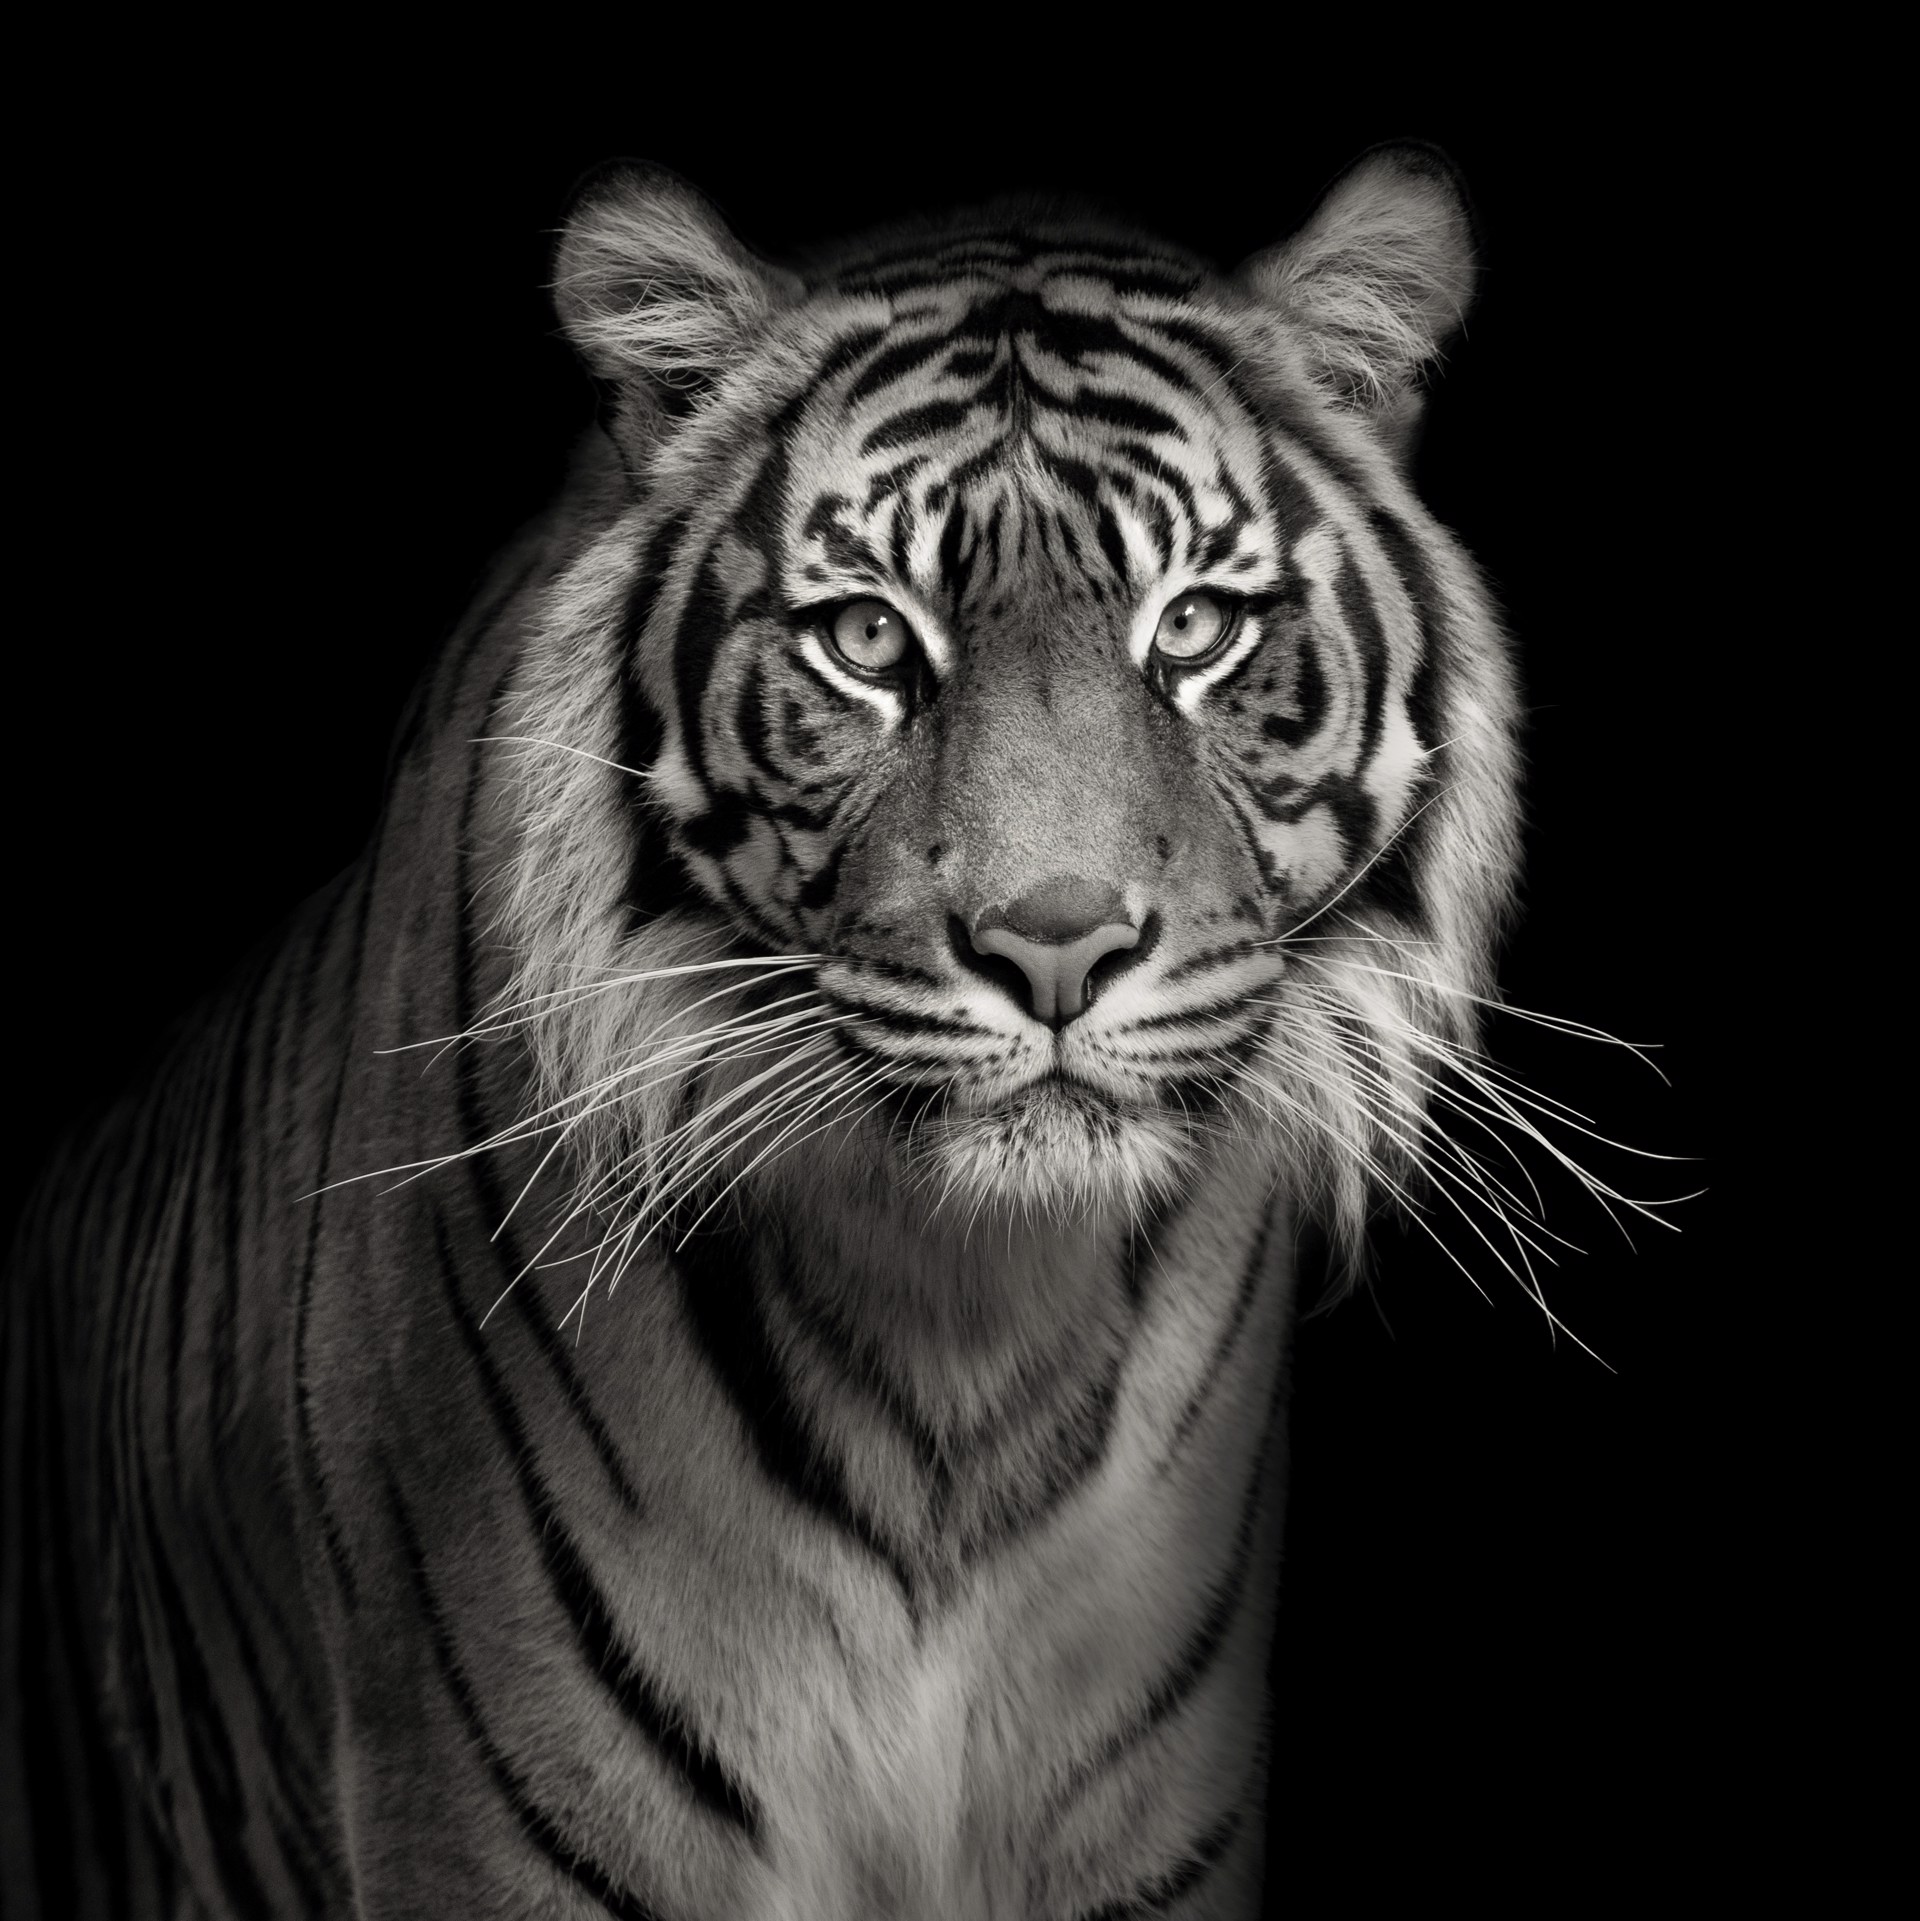 Portrait of a Tiger by Lauren Chambers